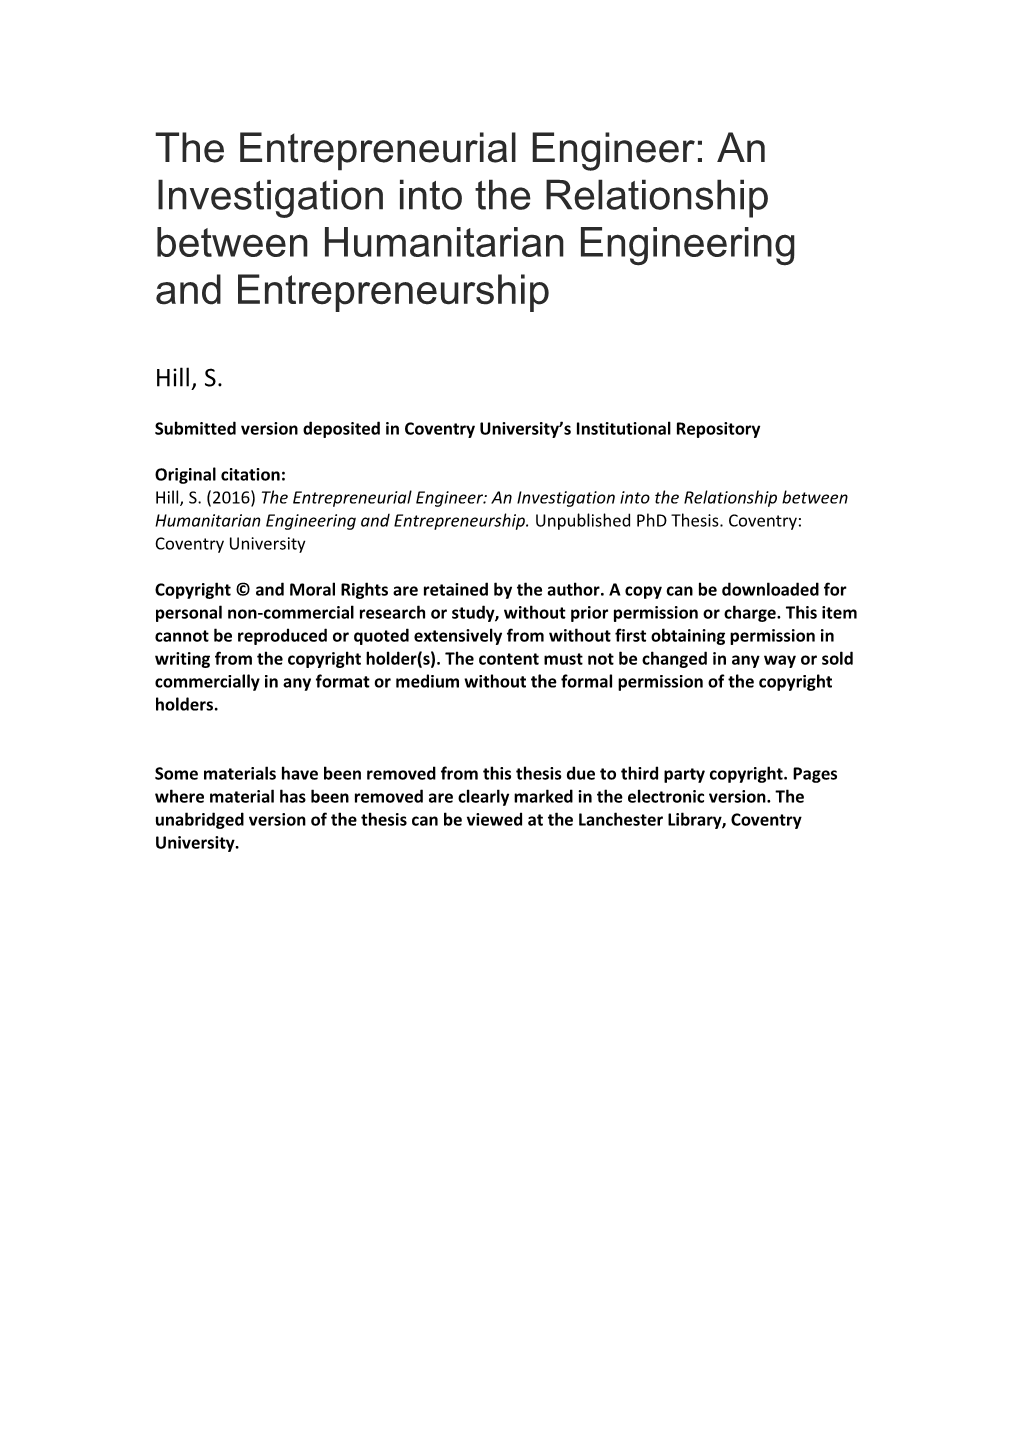 An Investigation Into the Relationship Between Humanitarian Engineering and Entrepreneurship